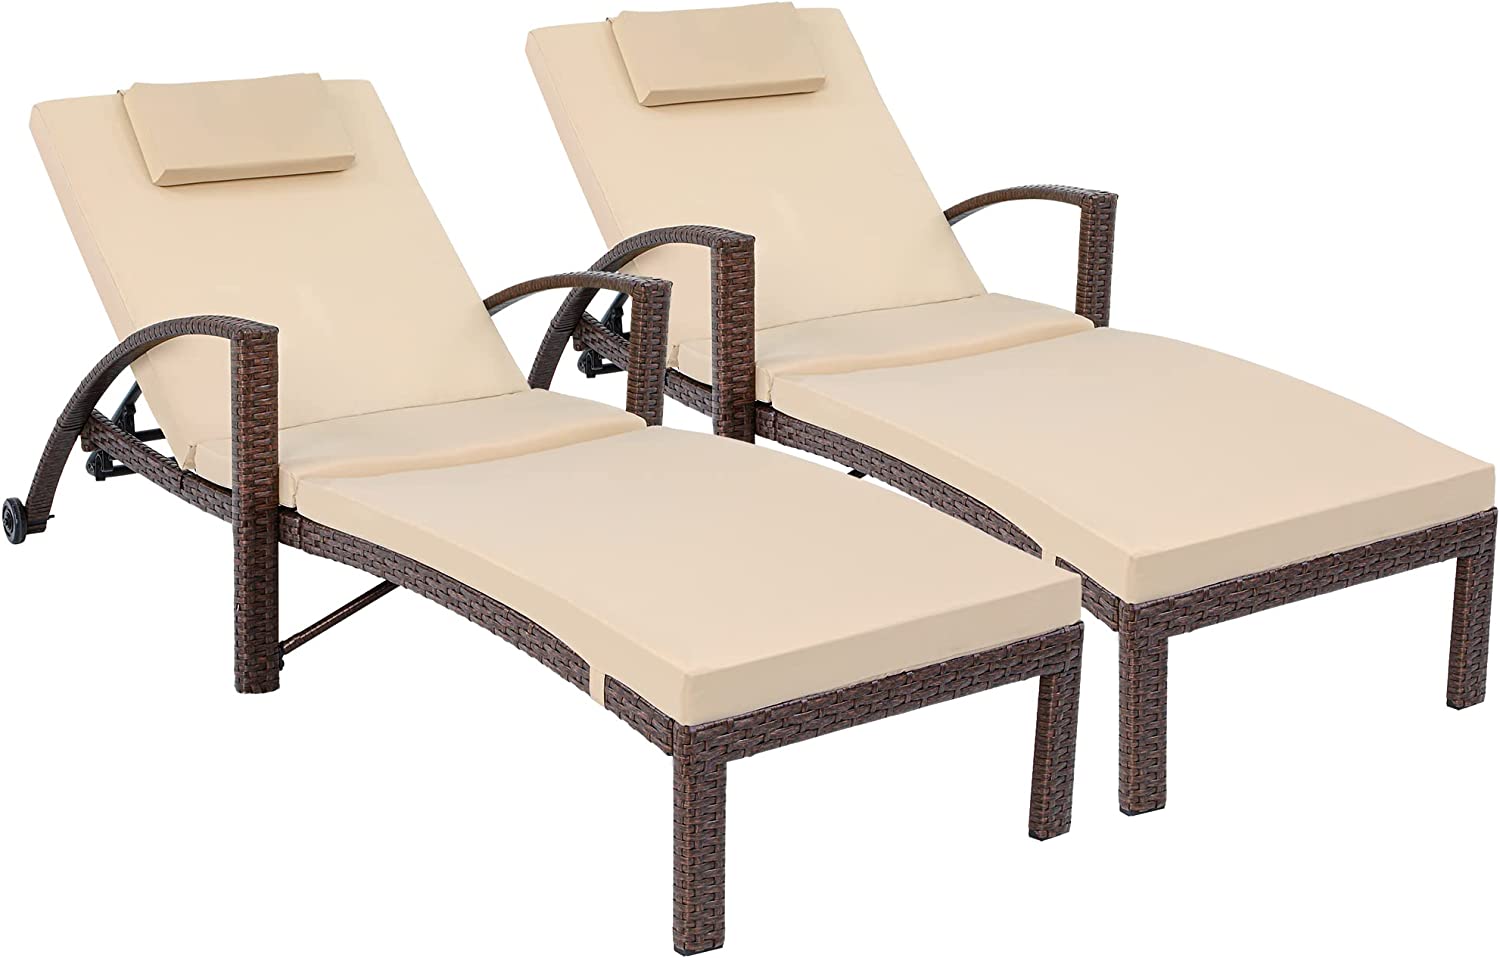 DWVO Outdoor Chaise Lounge Chairs, PE Rattan Wicker Patio Pool Loungers with Adjustable Backrest, Arm, Cushion, Pillow and Wheels for Poolside Backyard Porch Garden Beach (2, Brown) - image 2 of 9